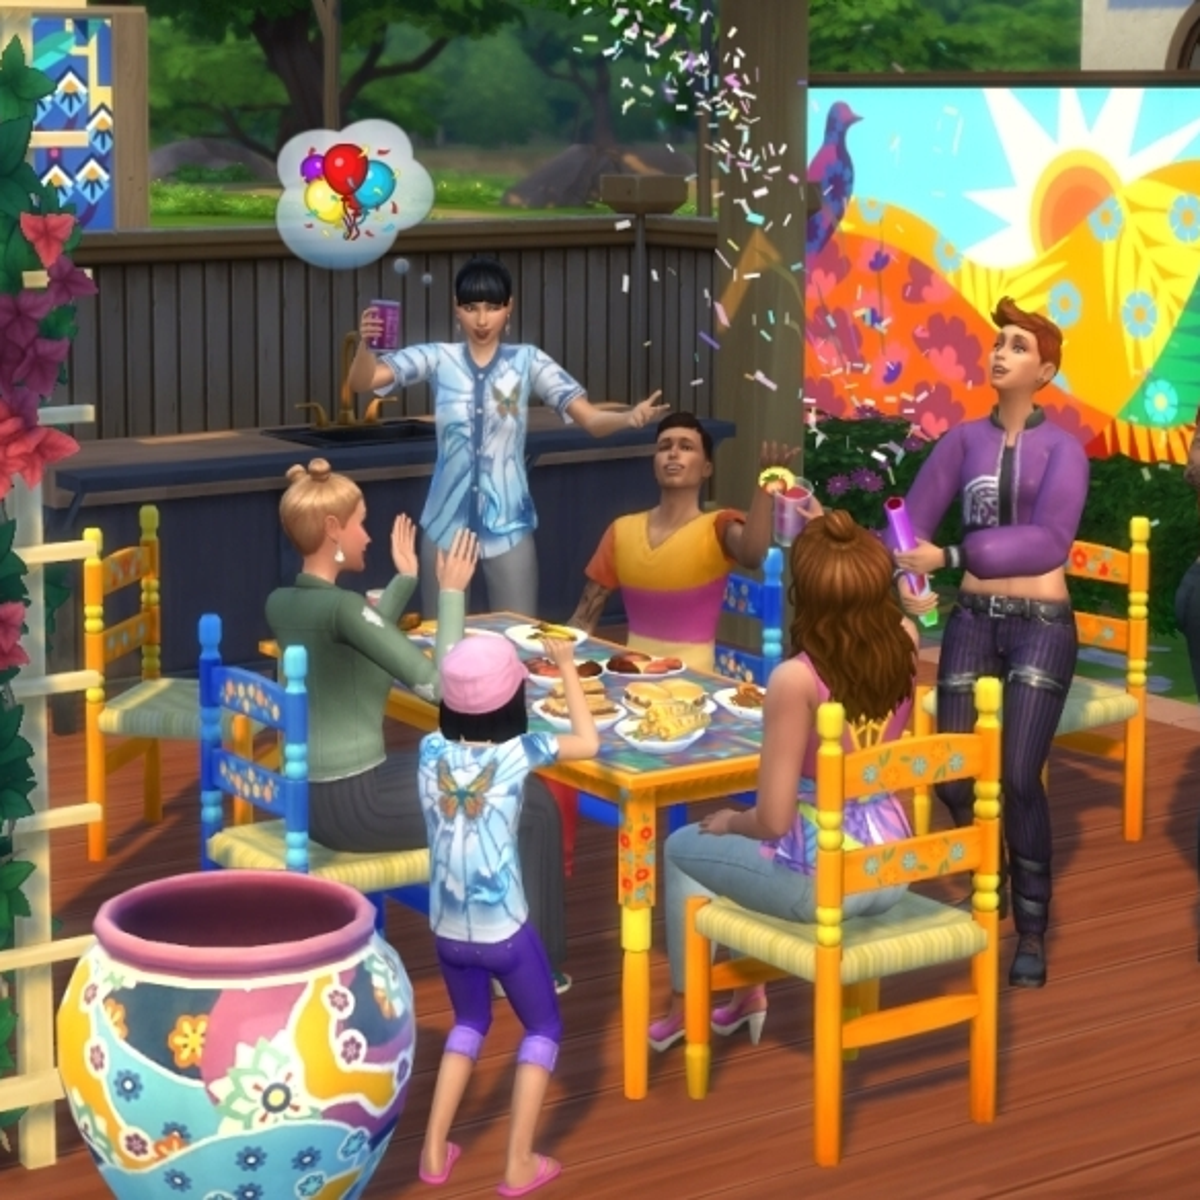 The Sims 4 Cheat Codes - The Sims Resource - Blog